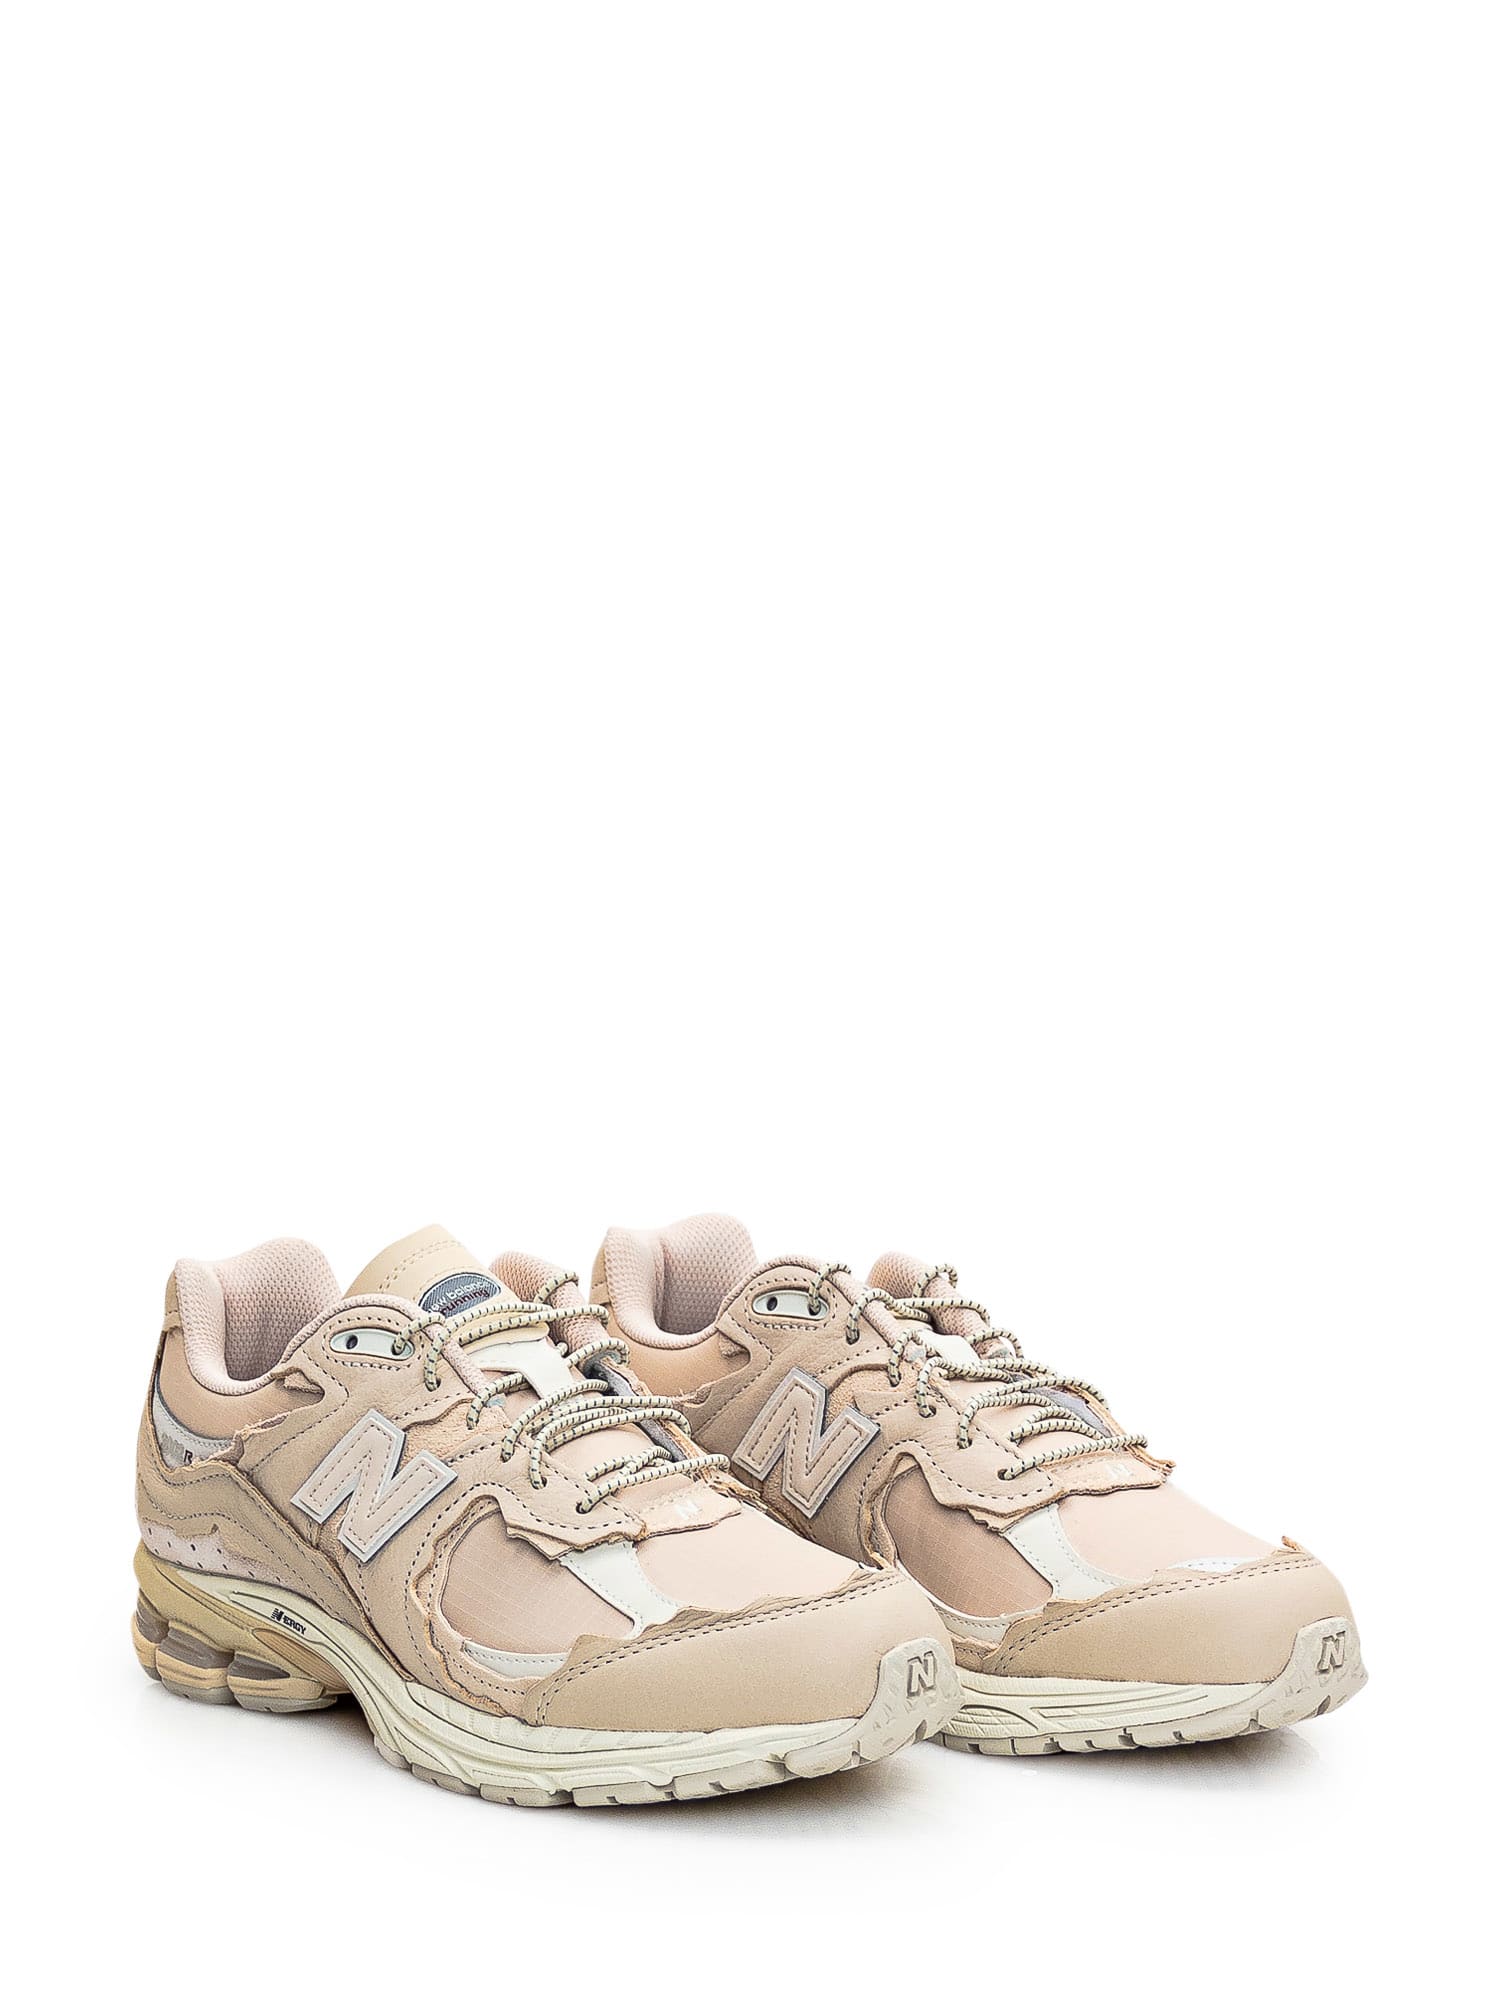 Shop New Balance Sneaker 2002r In Sand Stone